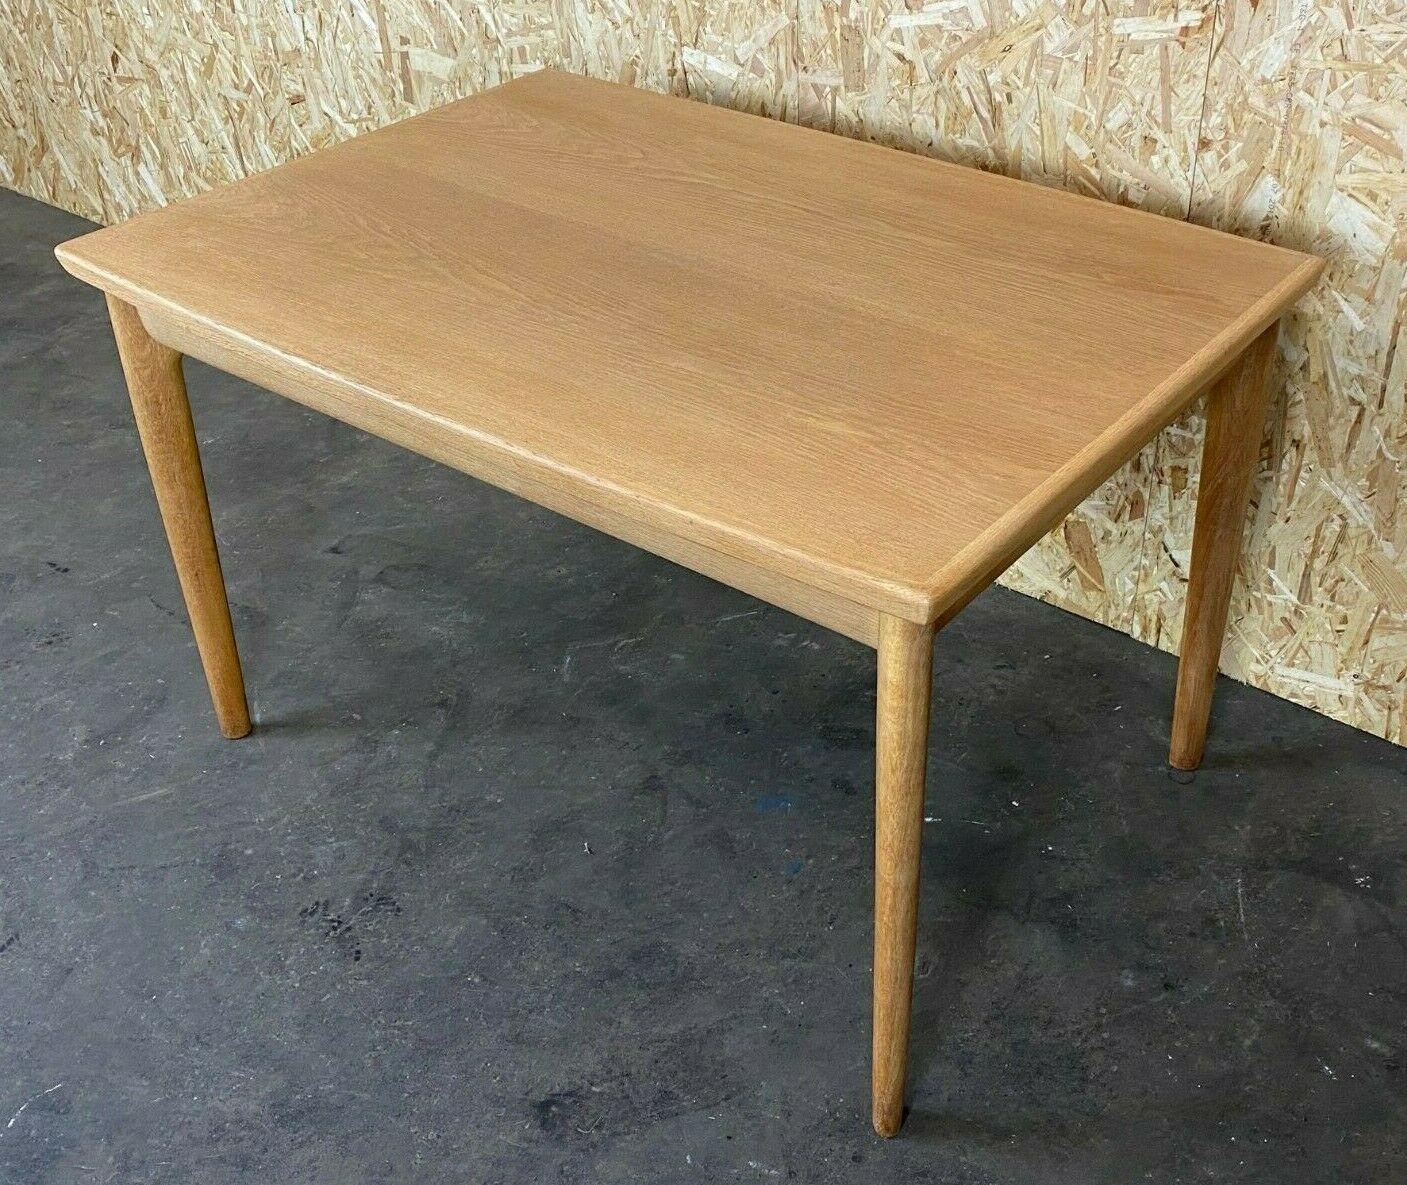 60s 70s oak dining table Danish Grete Jalk for Glostrup Design

Object: dining table / dining table

Manufacturer: Glostrup

Condition: good

Age: around 1960-1970

Dimensions:

(+ 2x 47cm) 121cm x 86.5cm x 74cm

Other notes:

The